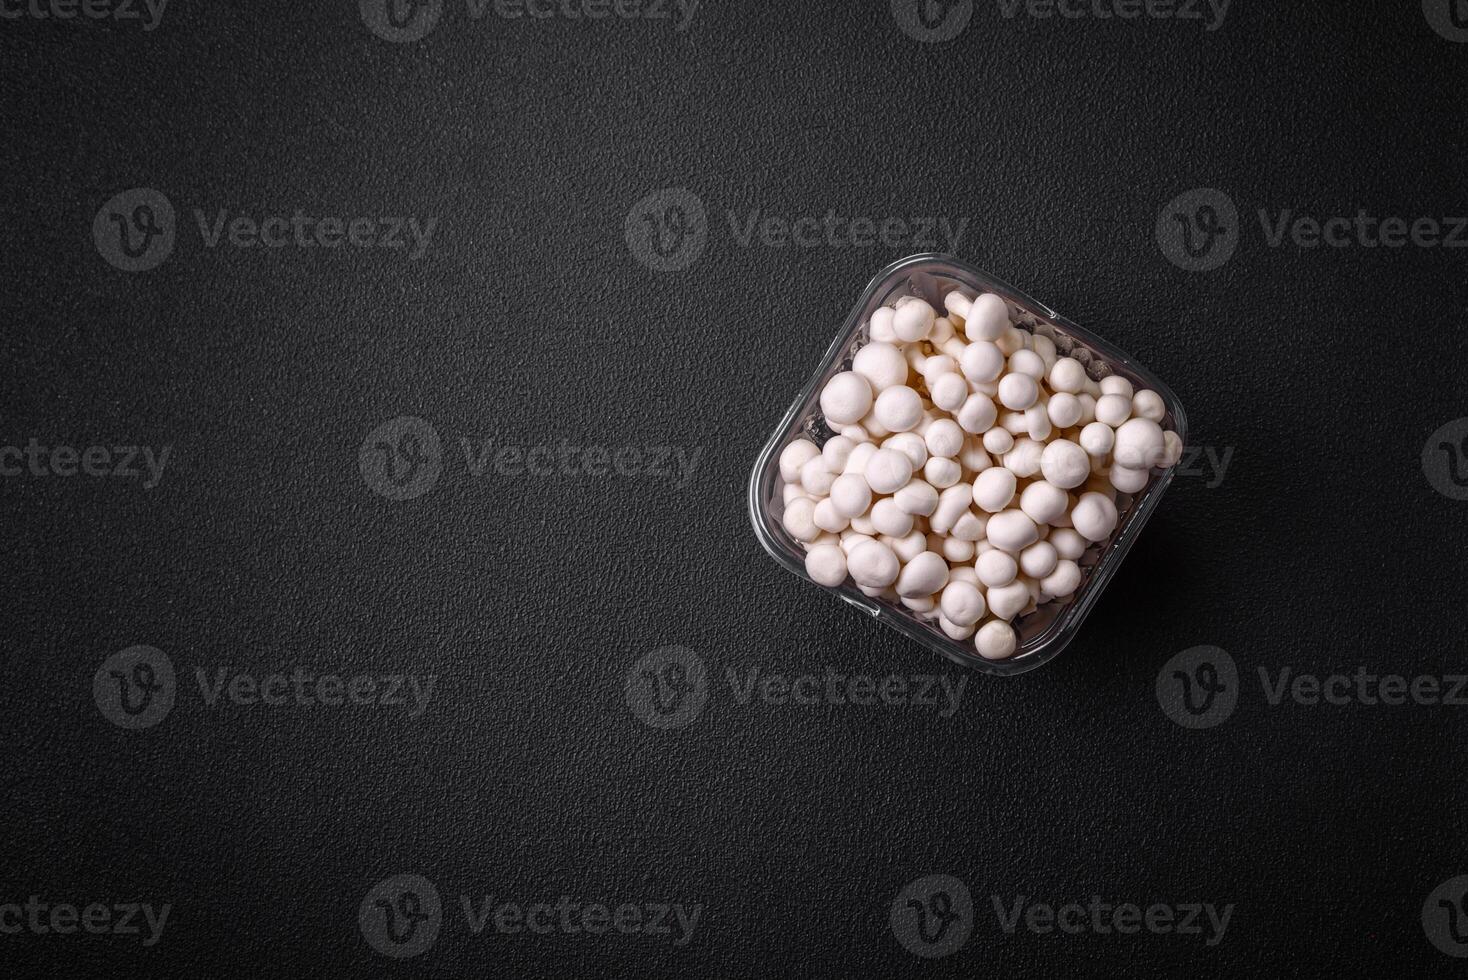 Small white edible beech mushrooms with salt and spices on a plain background photo